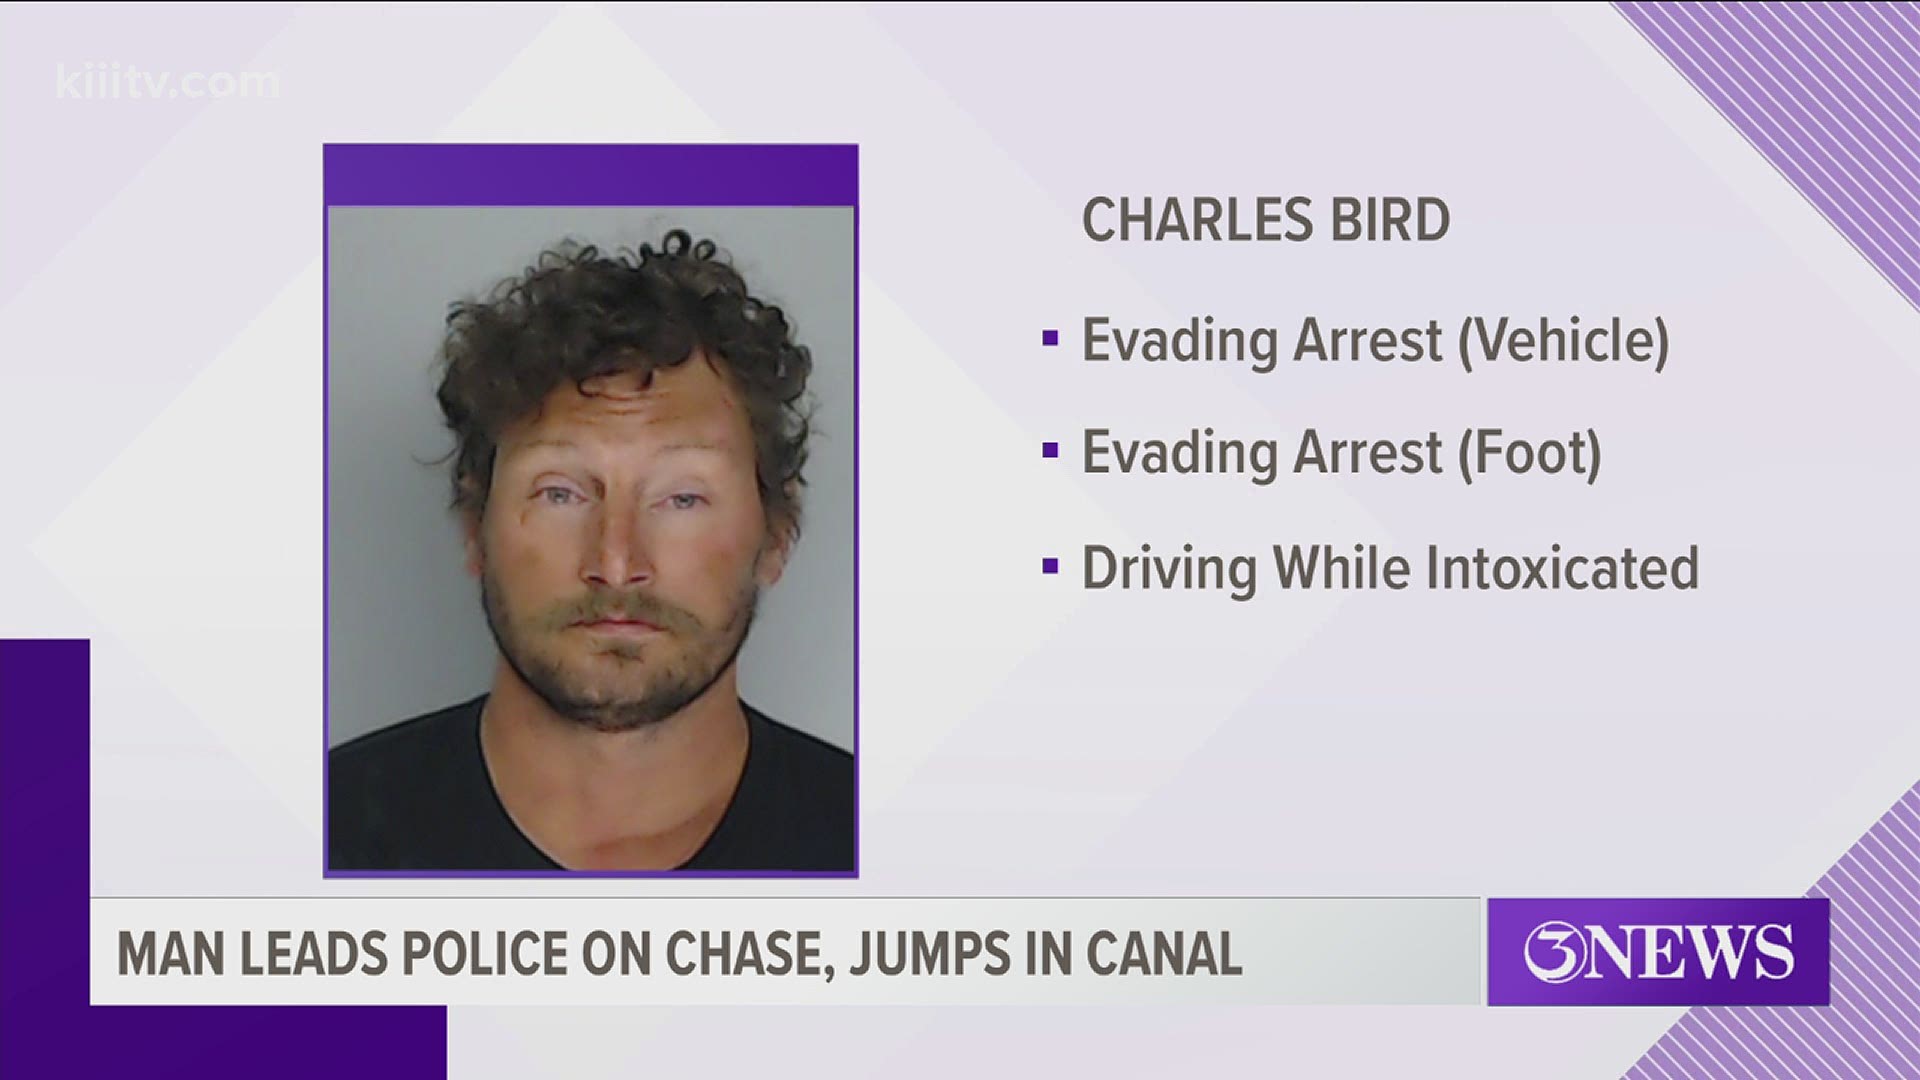 The officer attempted to stop the vehicle that was being driven by 31-year-old, Charles Bird, and issue a violation, but he refused to stop.